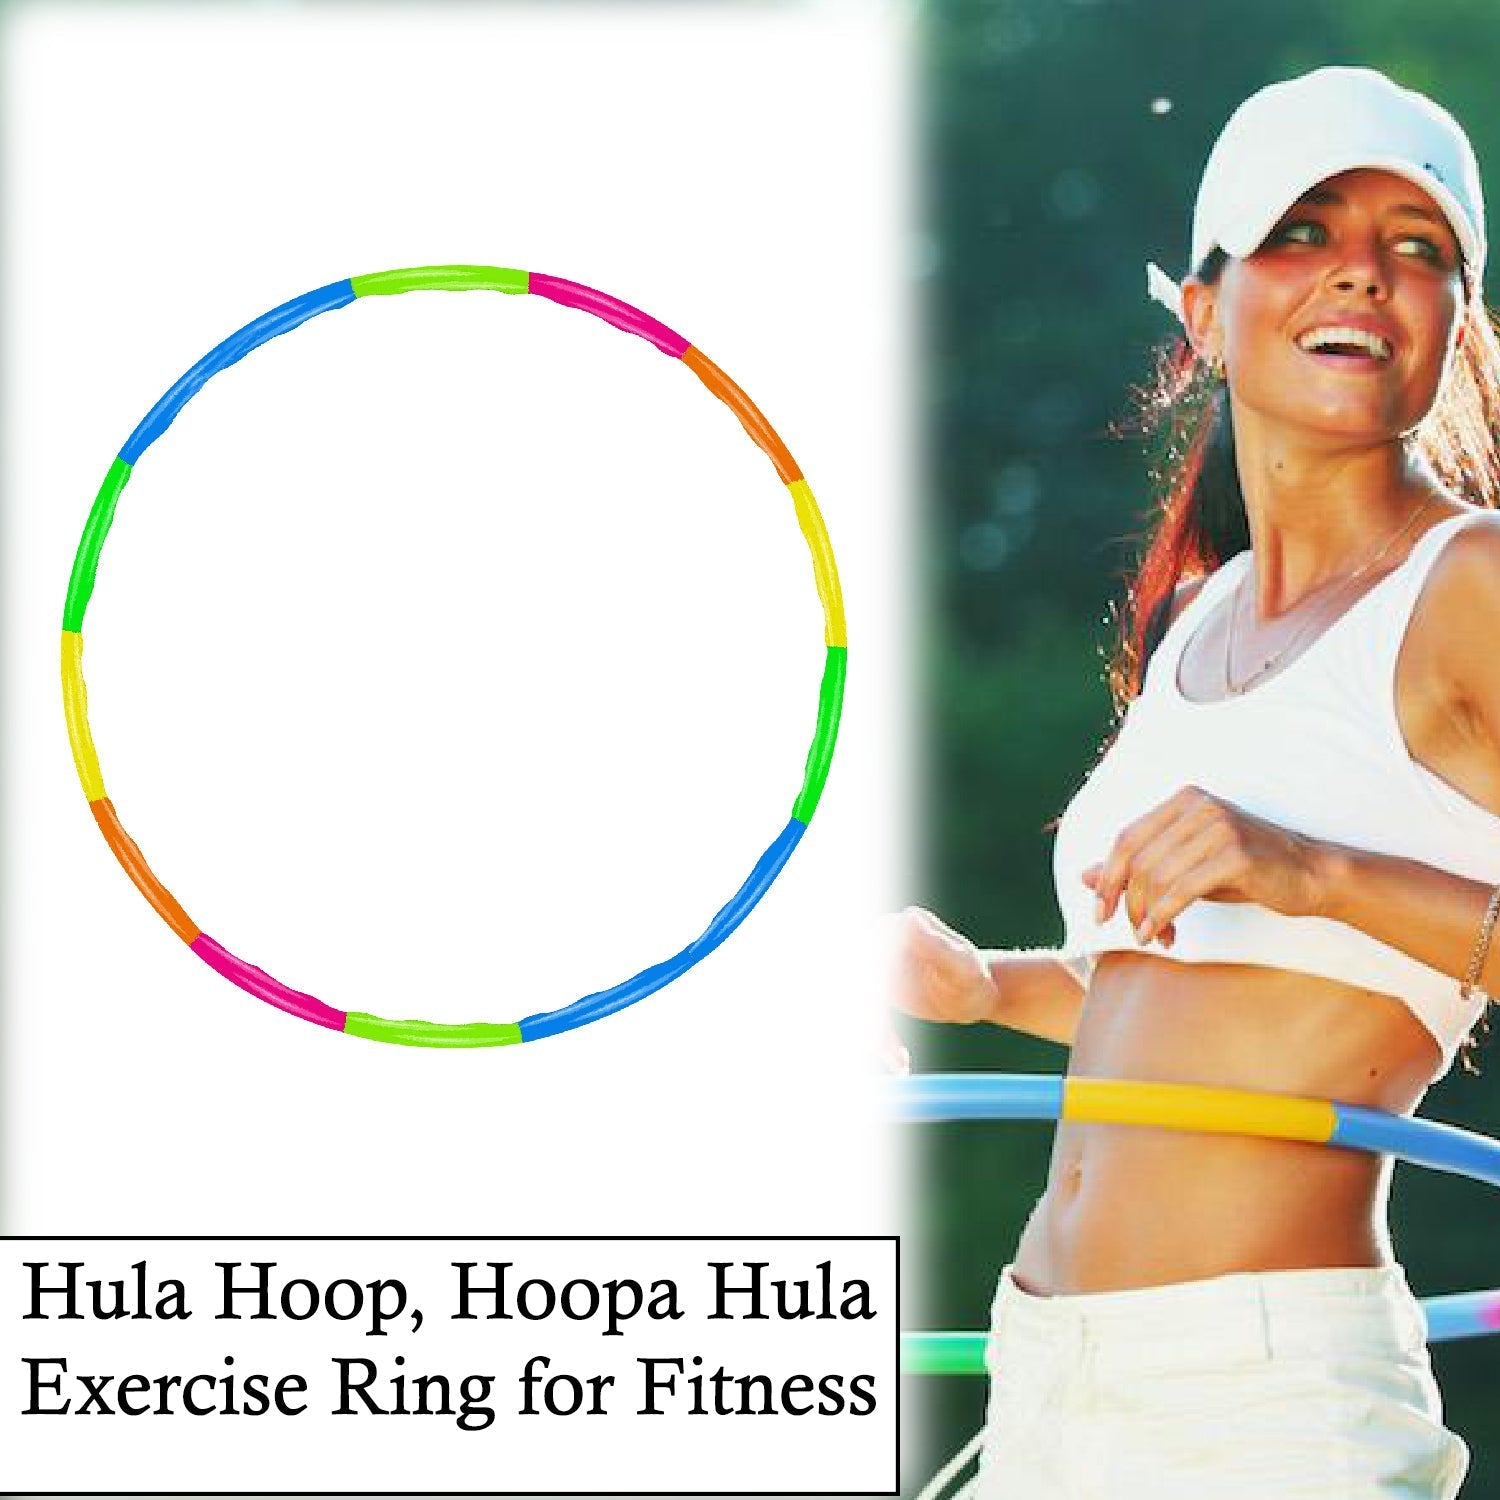 1664 Hula Hoop, Hoopa Hula, Exercise Ring for Fitness 